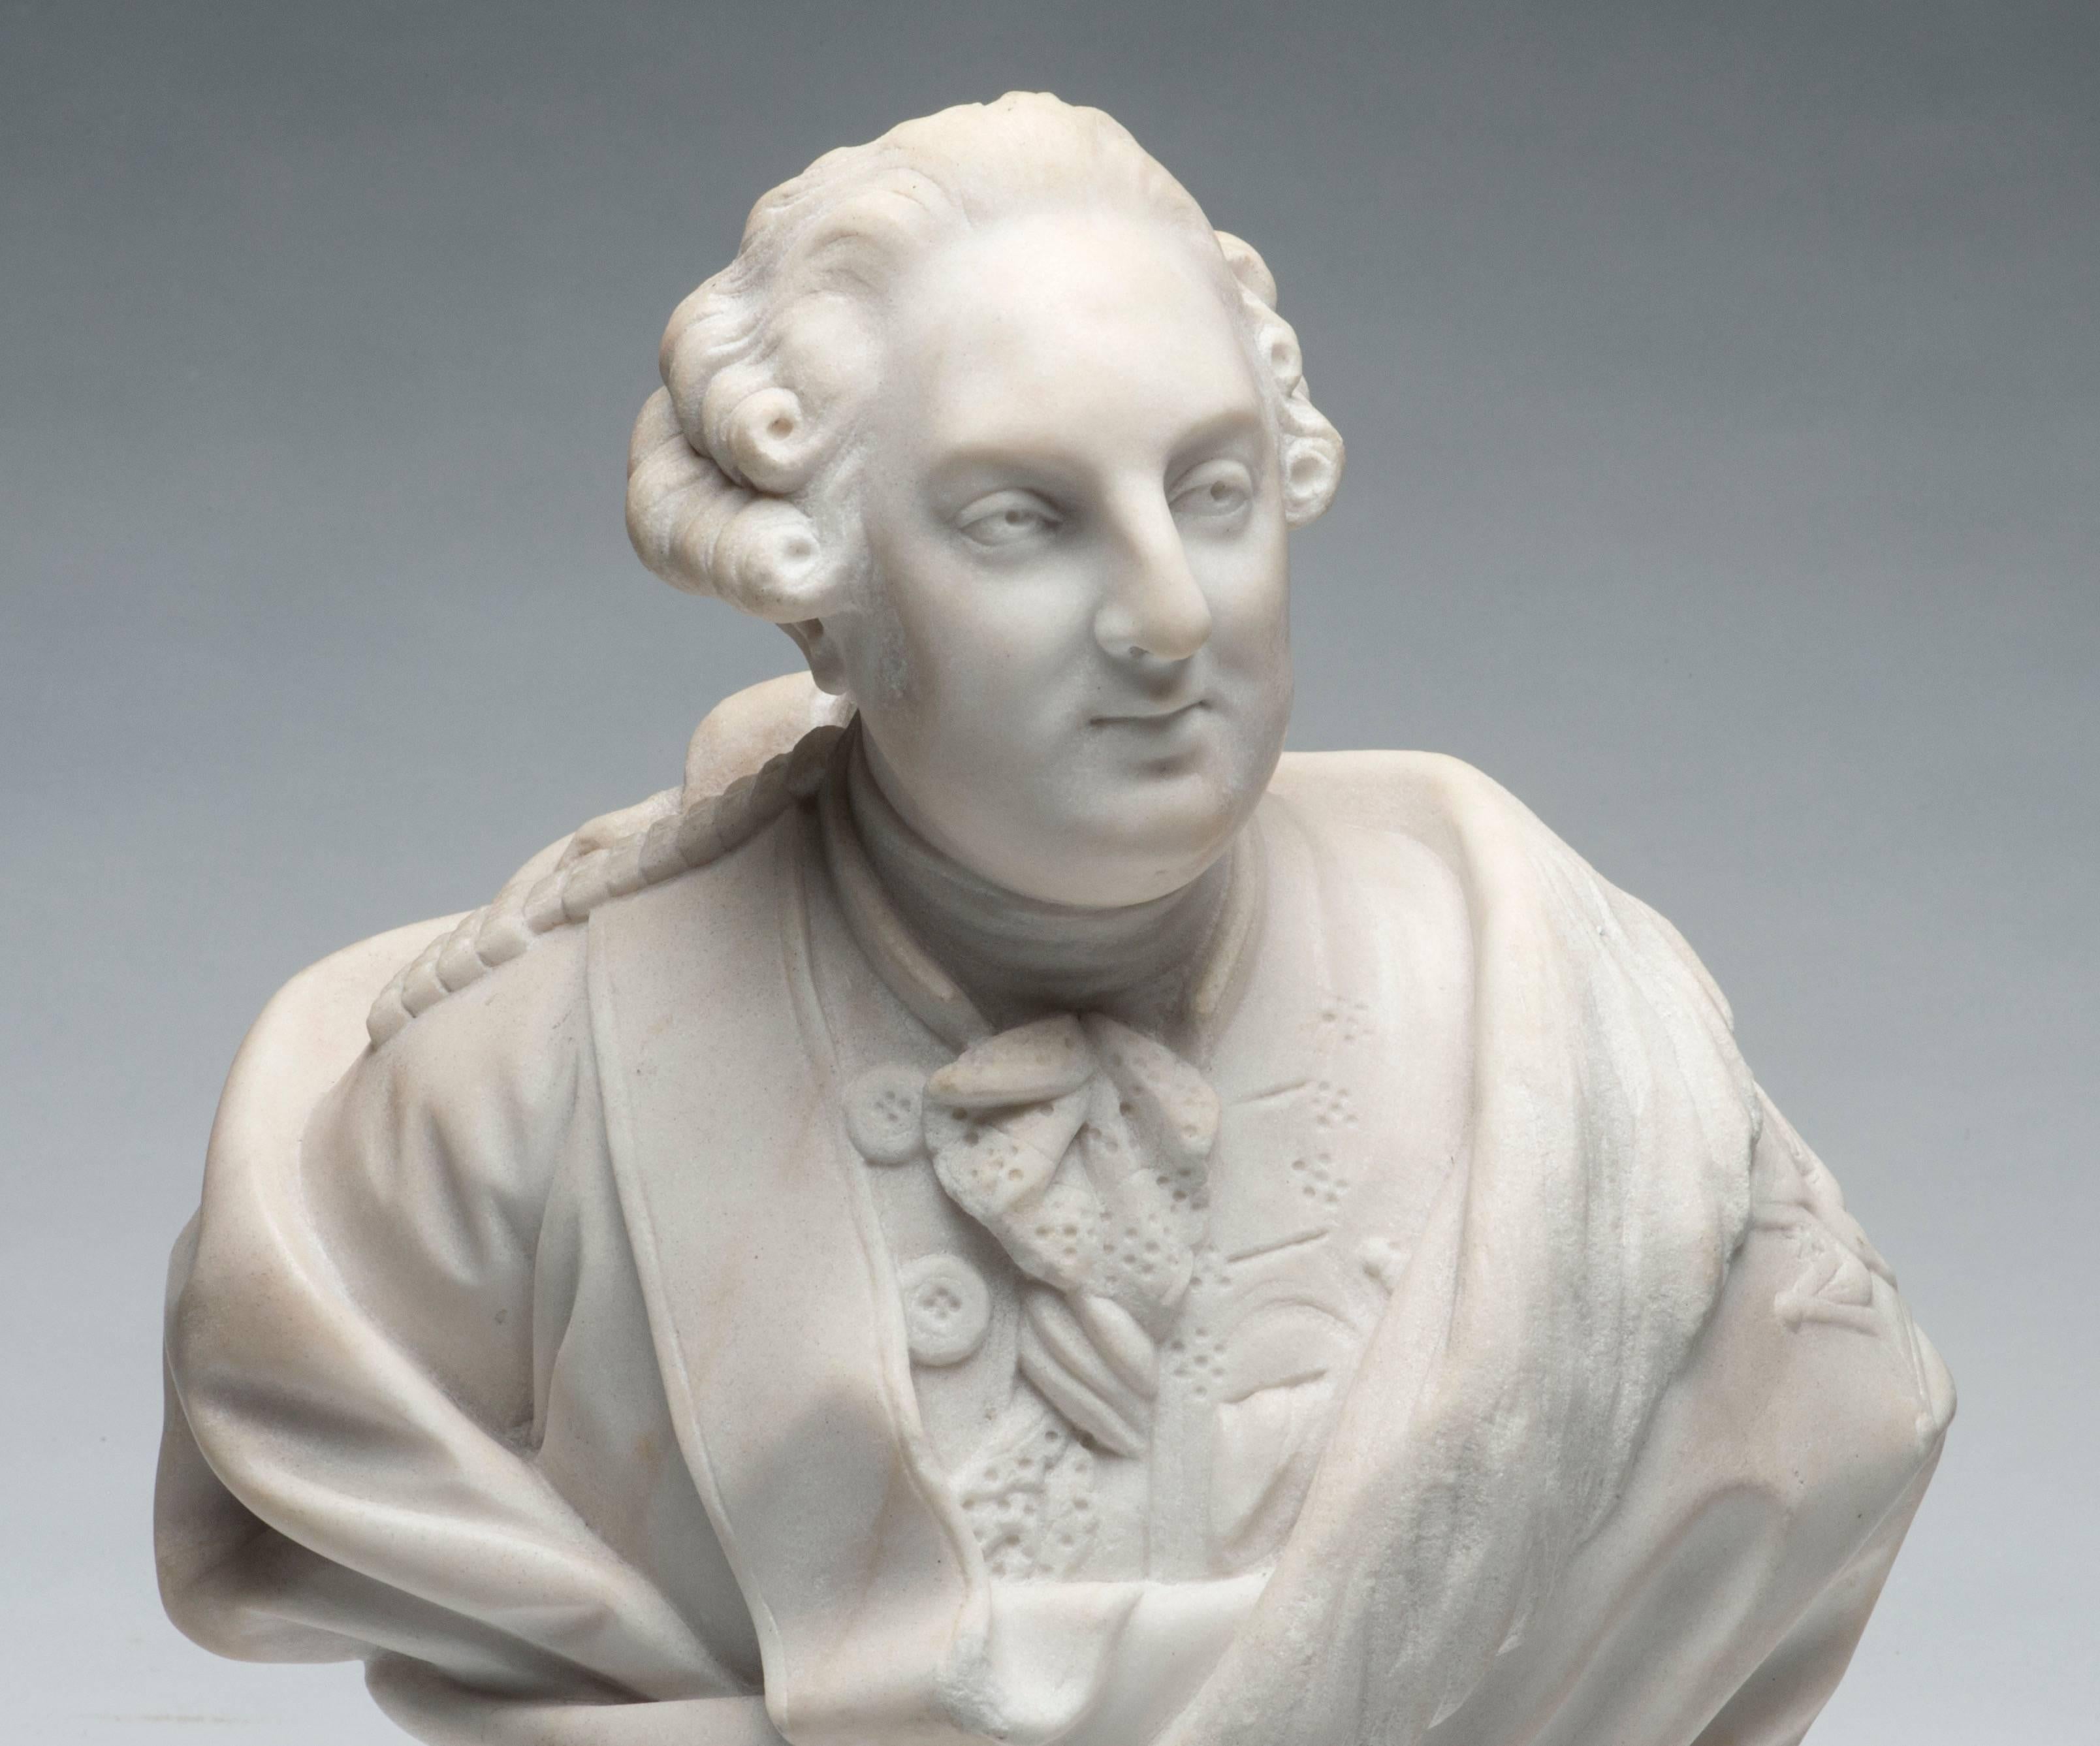 19th century, marble bust of Louis XVI of France, circa 1870 after the original sculpture by Jean-Antoine Houdon (French 1741-1828) which is now in the collection at Versailles. Measures: 14